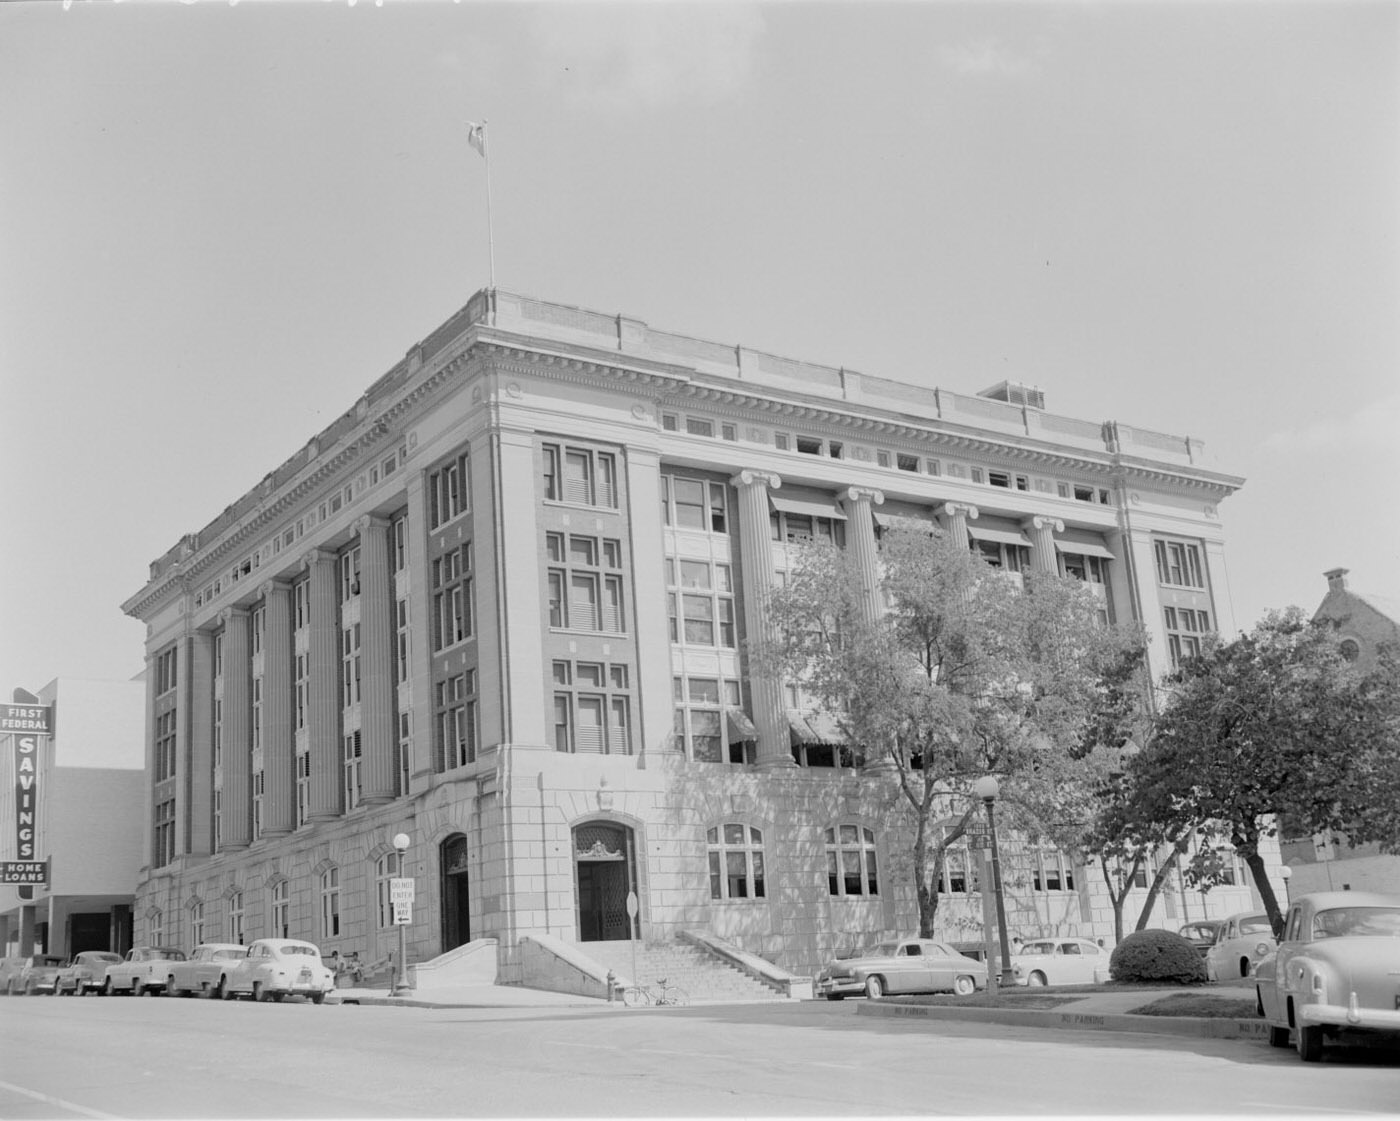 Land Office Building with Adjacent Savings Office, 1954